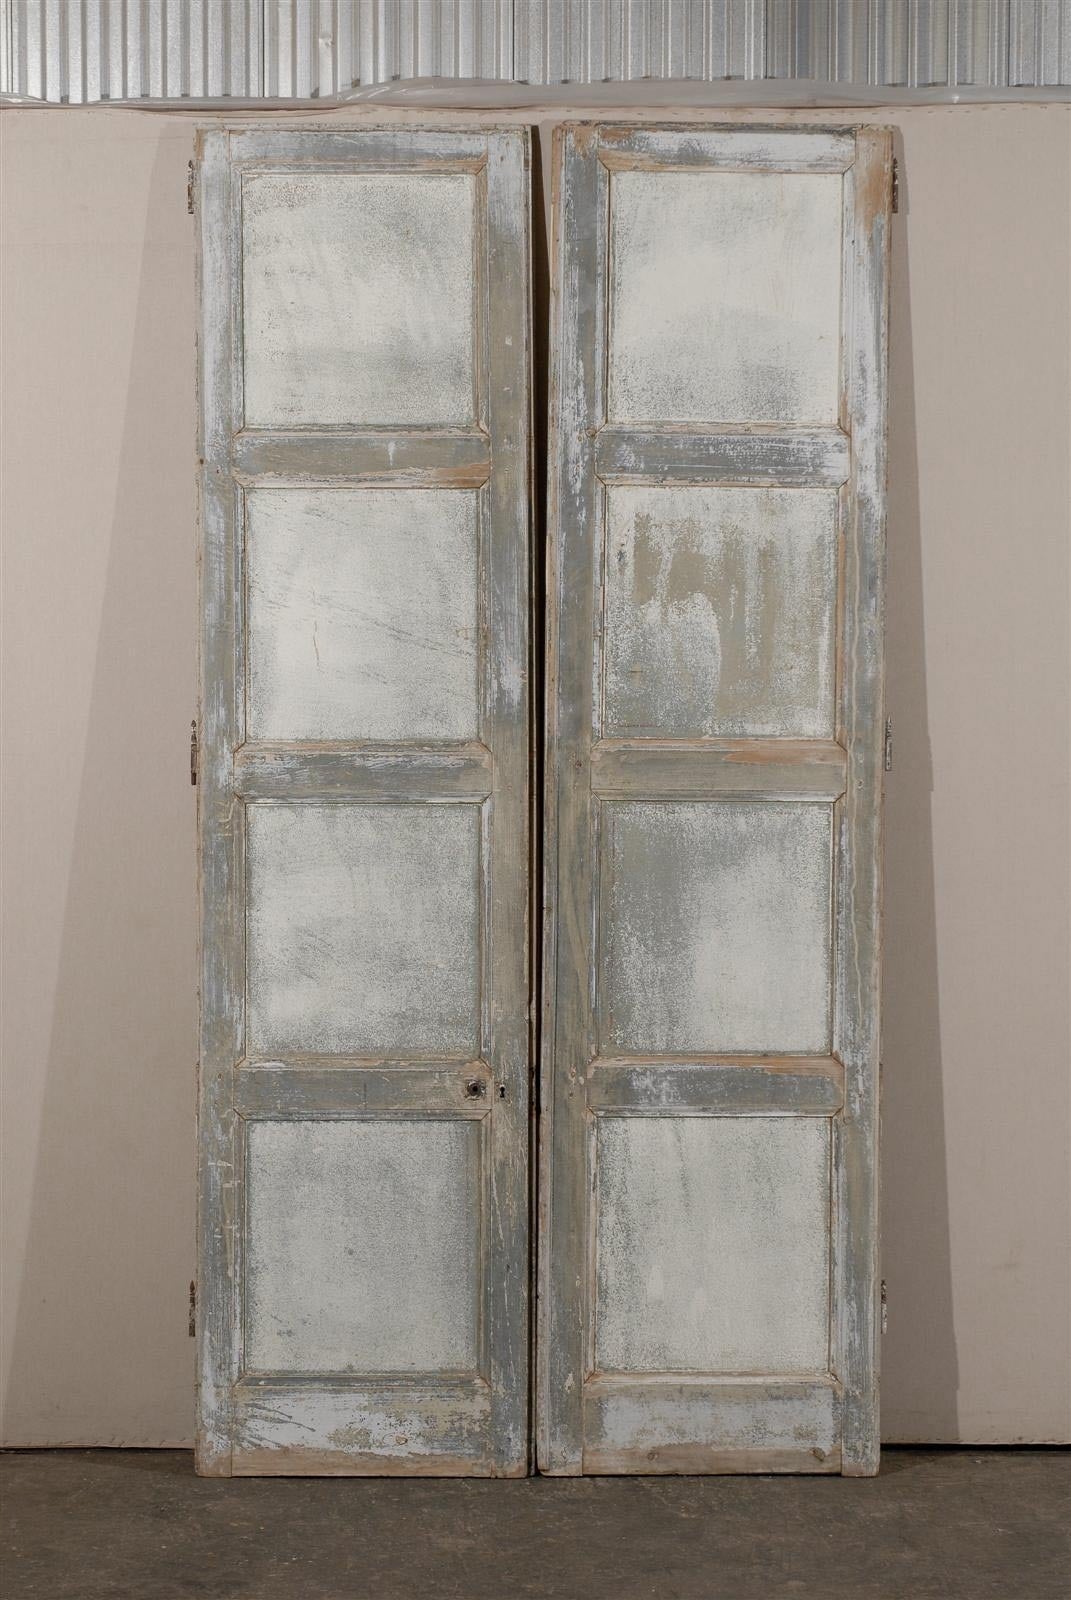 A Pair of French 19th Century Painted Wood Doors of Lovely Light Blue-Green Color. 

Please Look at Images 8, 9 and 10 to see the other side with the hardware.